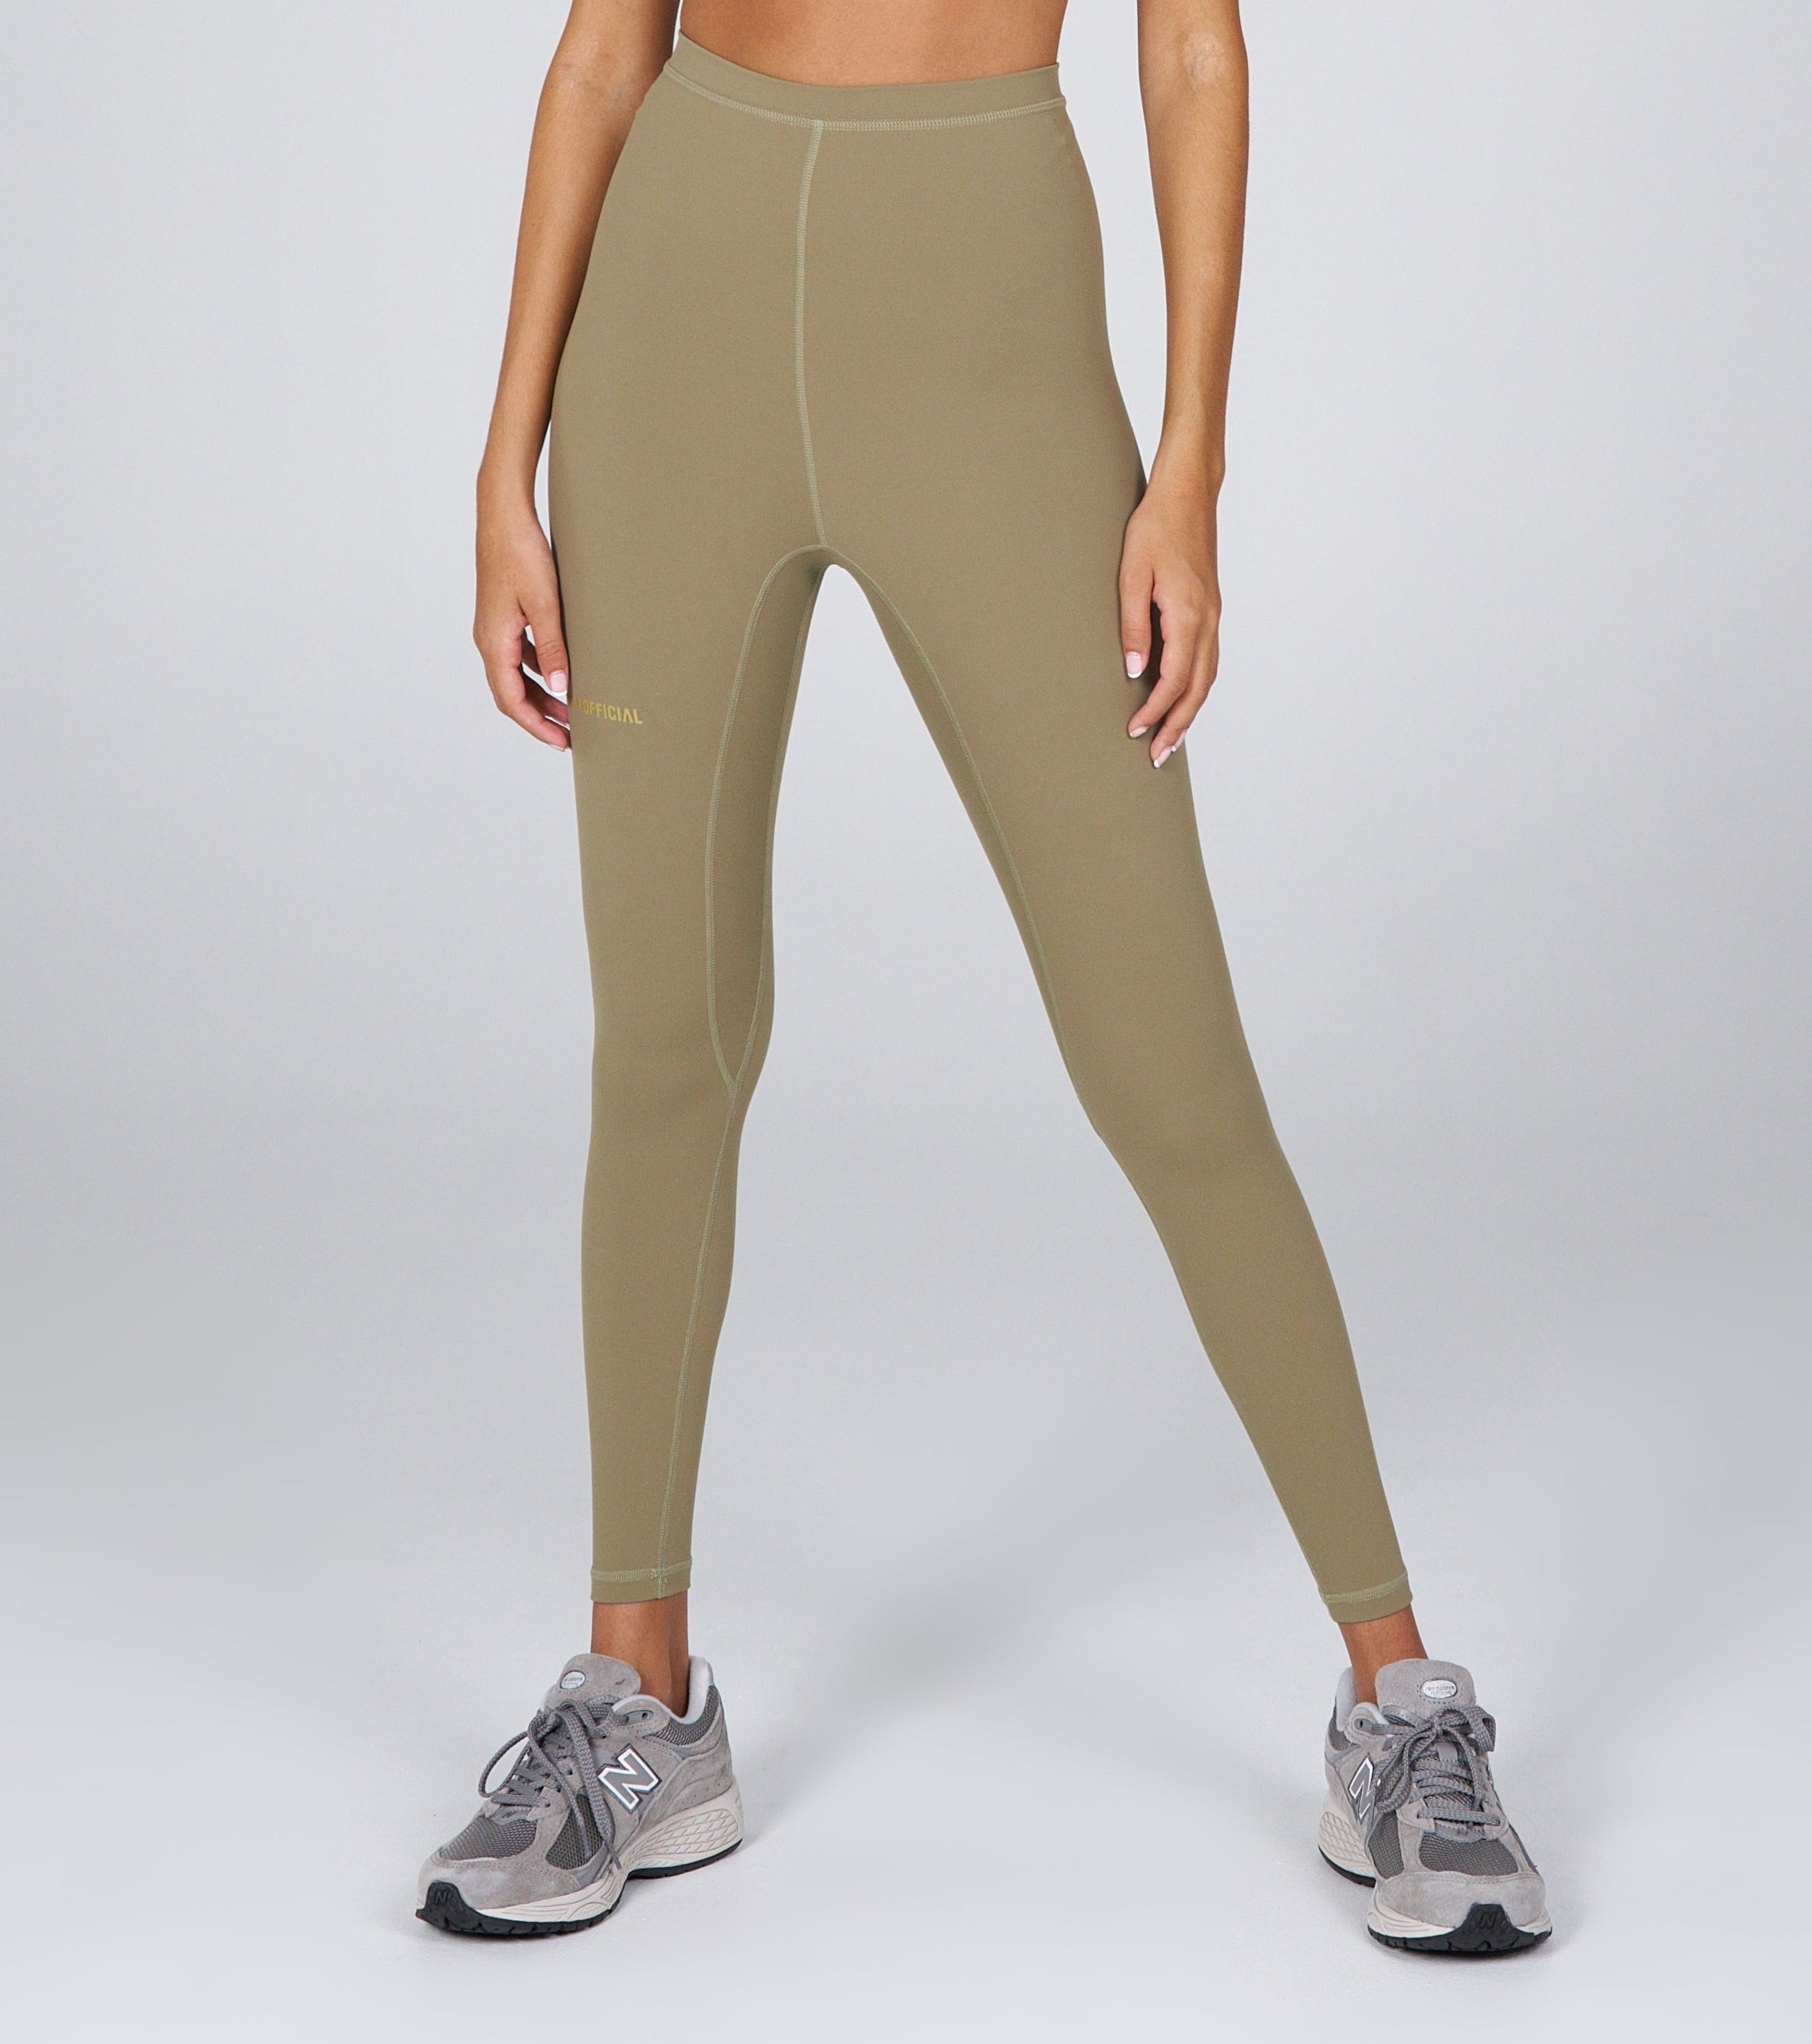 stax-aw-tights-creo-olive